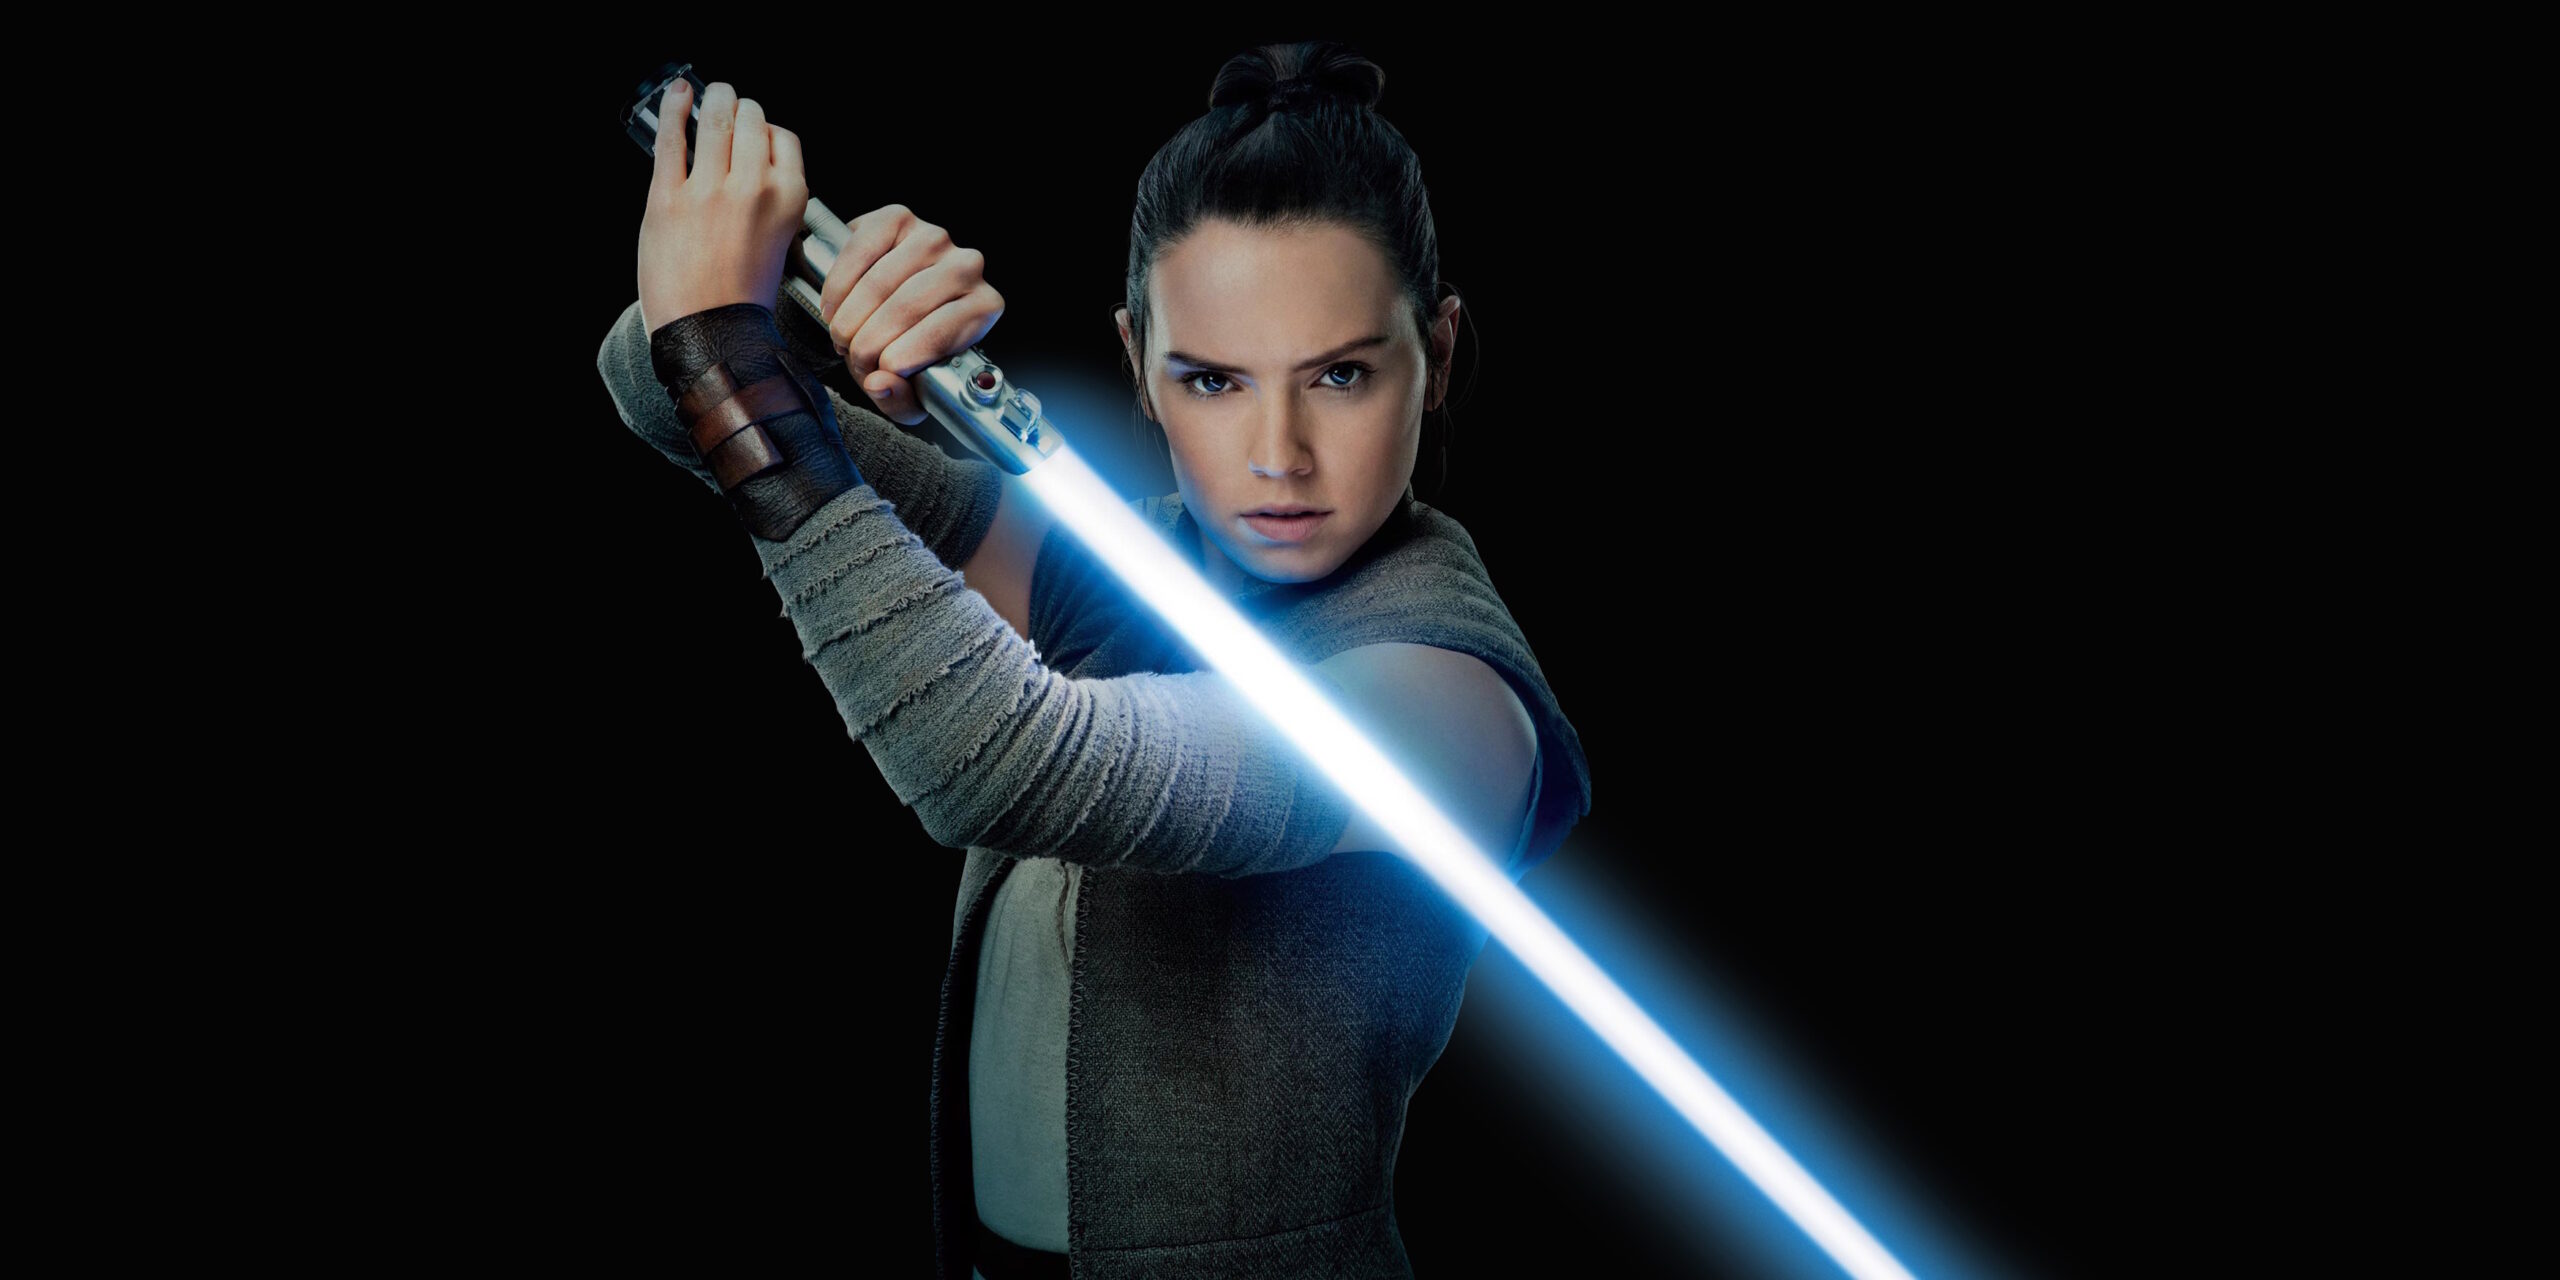 Daisy Ridley Says Next Star Wars Film Pushes The Story In a Different Direction